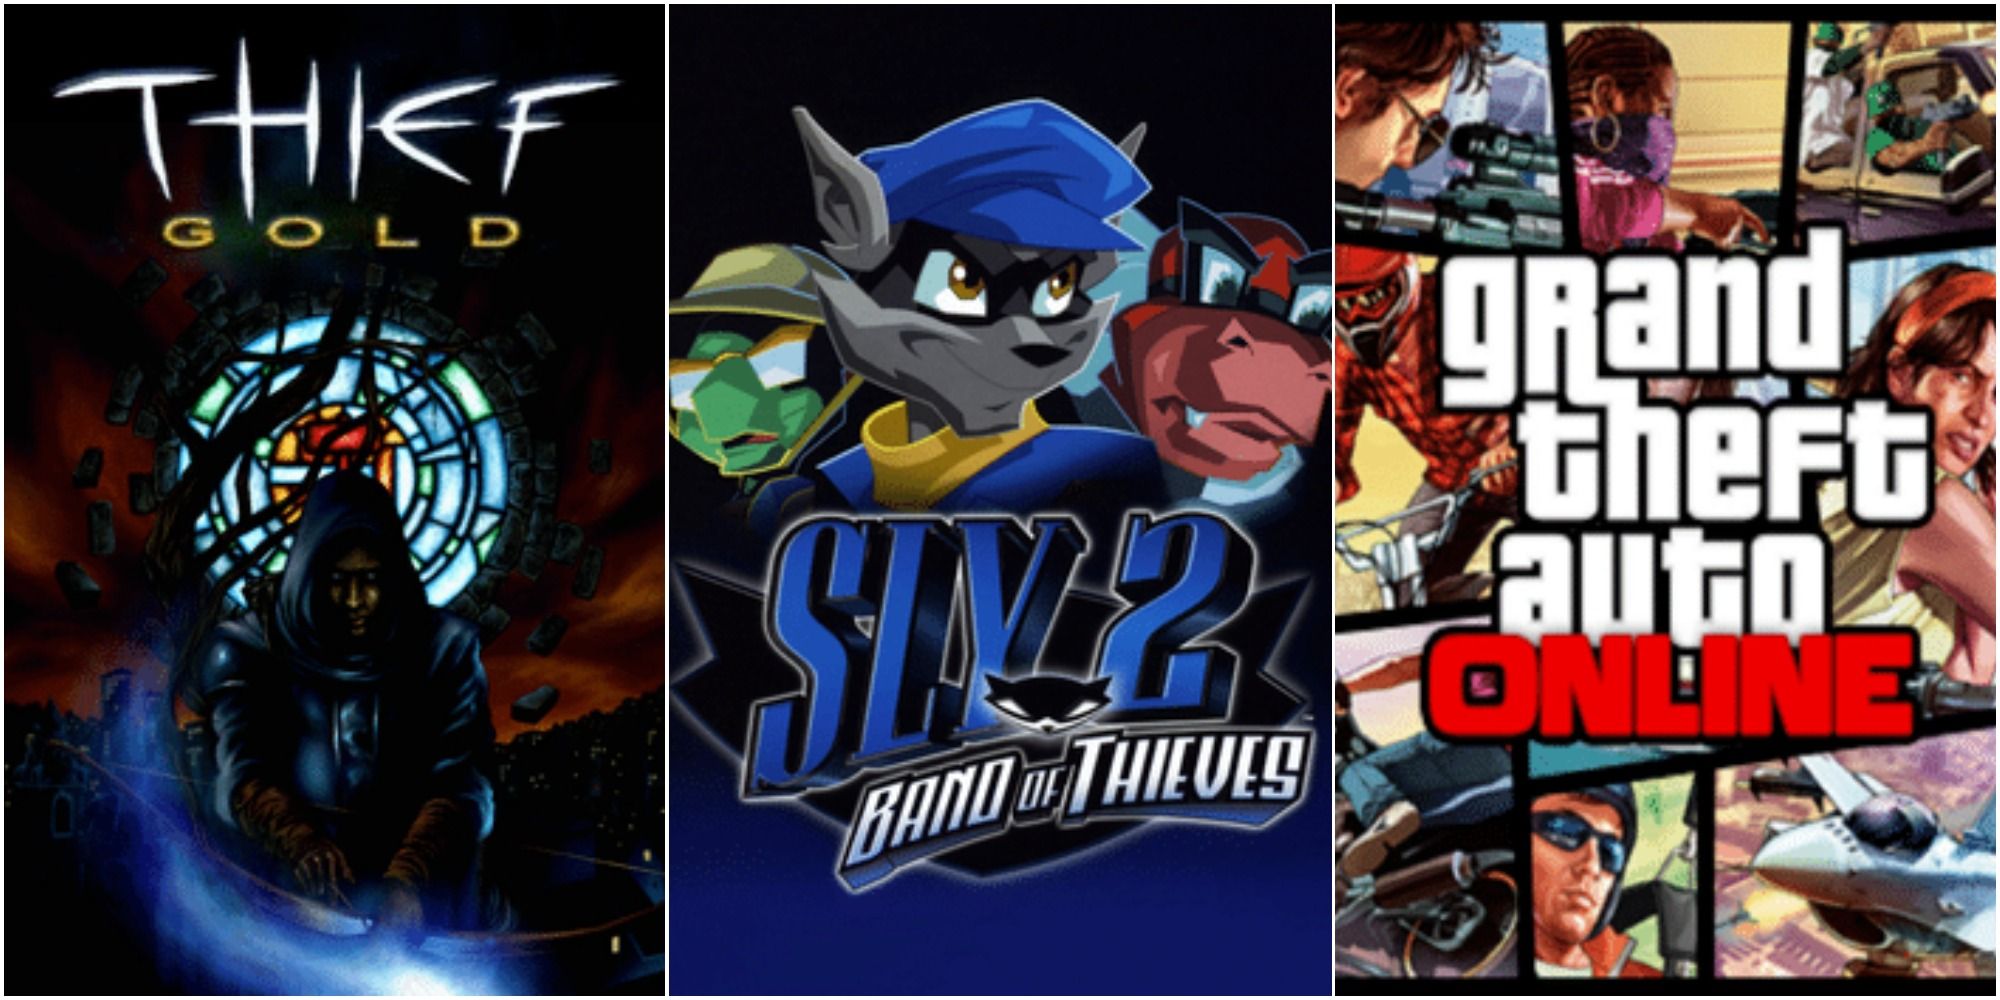 Split image promotional art with logos for Thief Gold, Sly 2: Band of Thieves, and Grand Theft Auto Online.